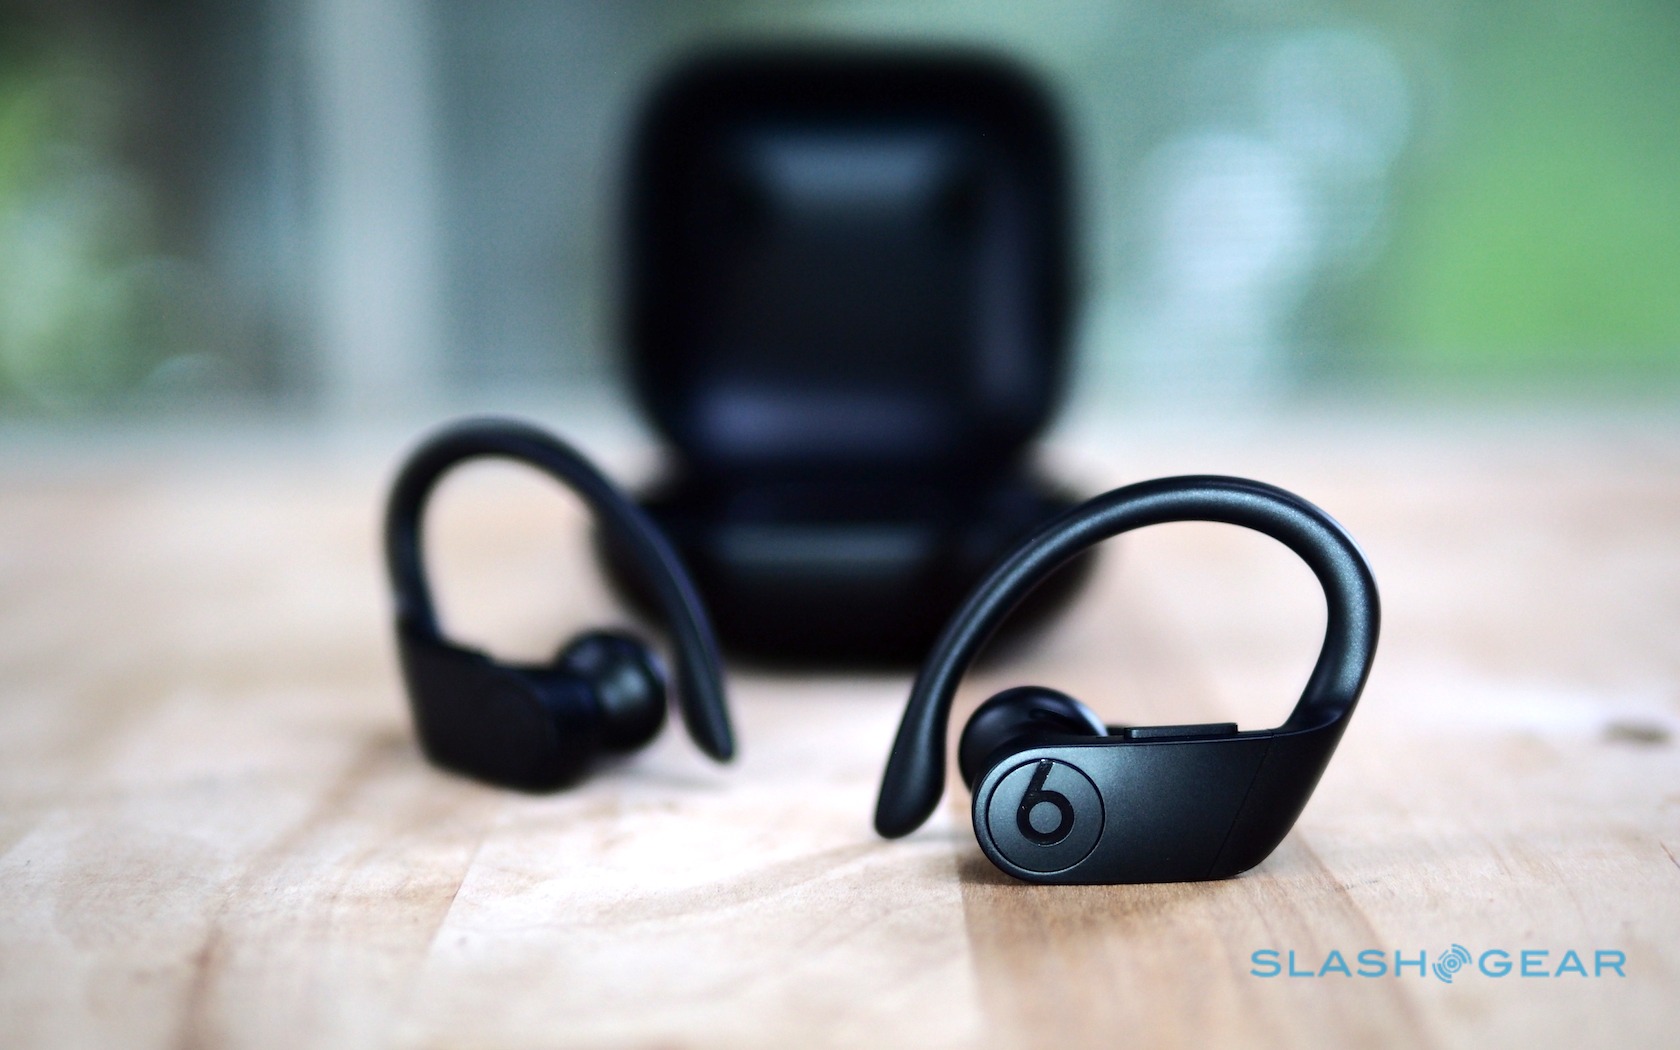 powerbeats work with android